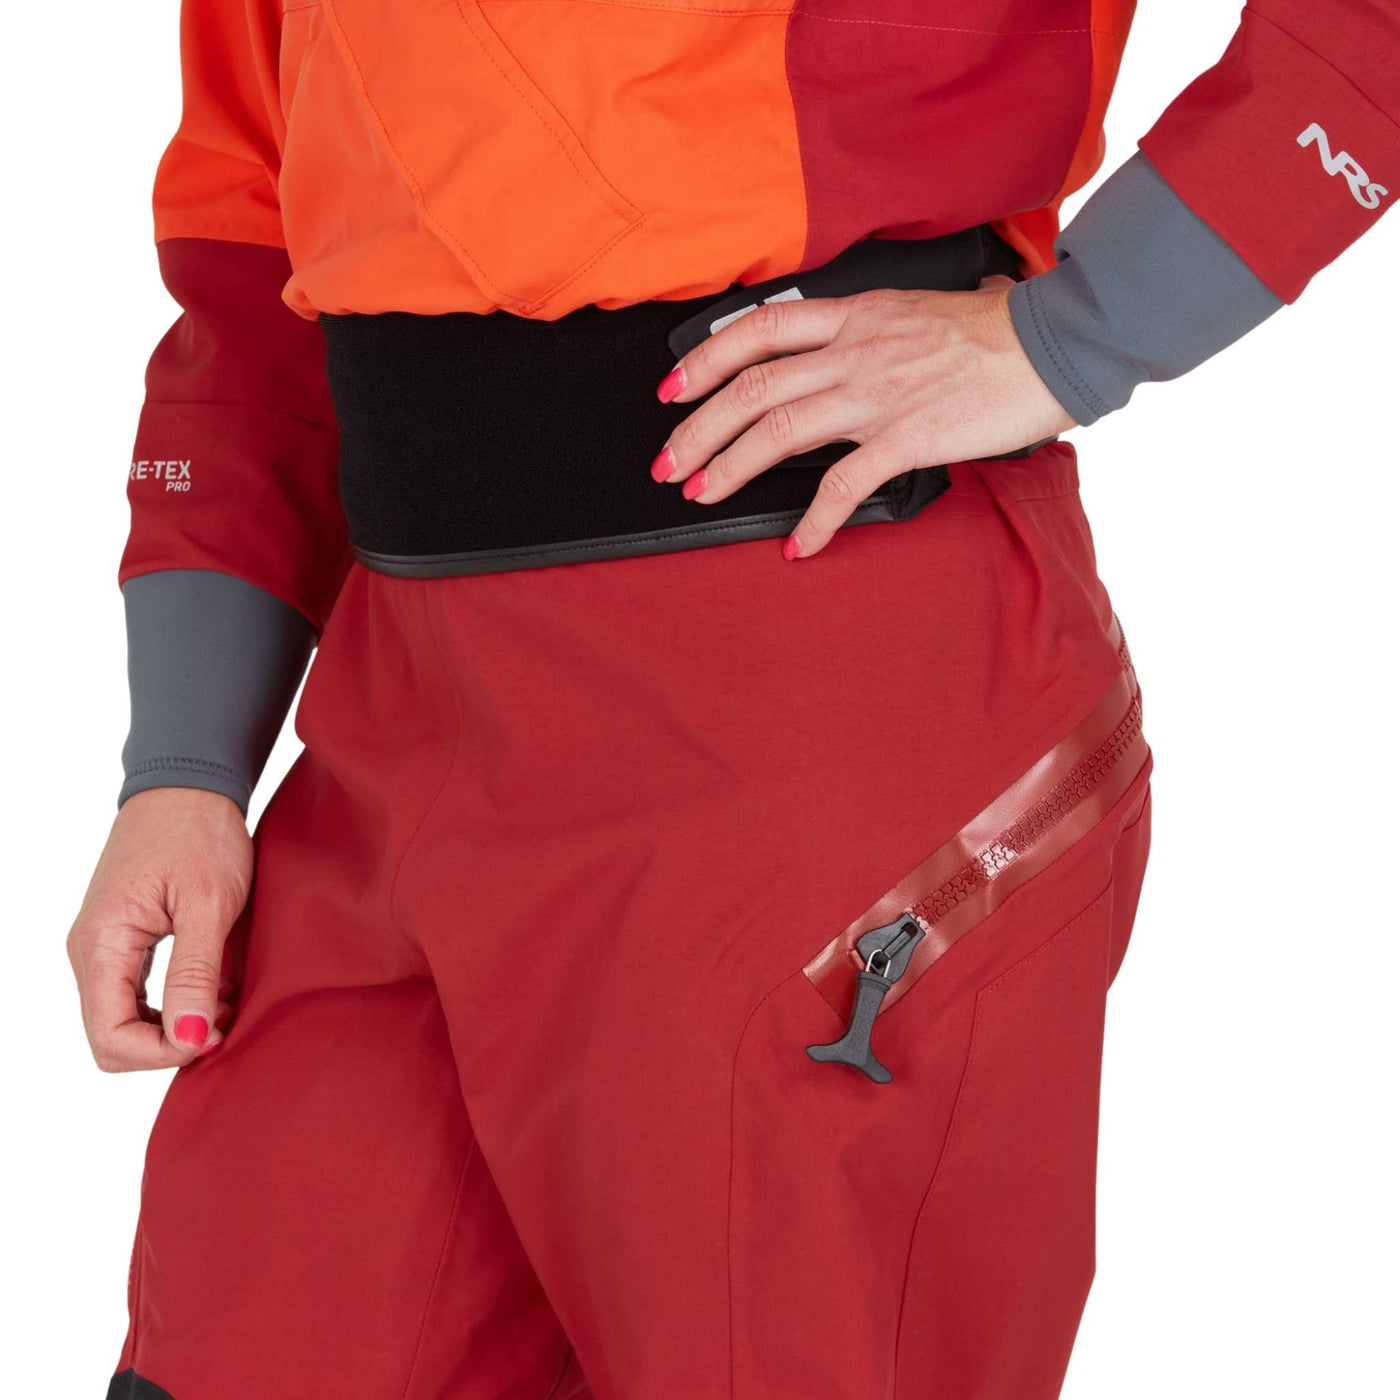 NRS Axiom Gore-Tex Pro Dry Suit - Womens | Kayak & Paddle Dry Suit | Further Faster Christchurch NZ #poppy-vino